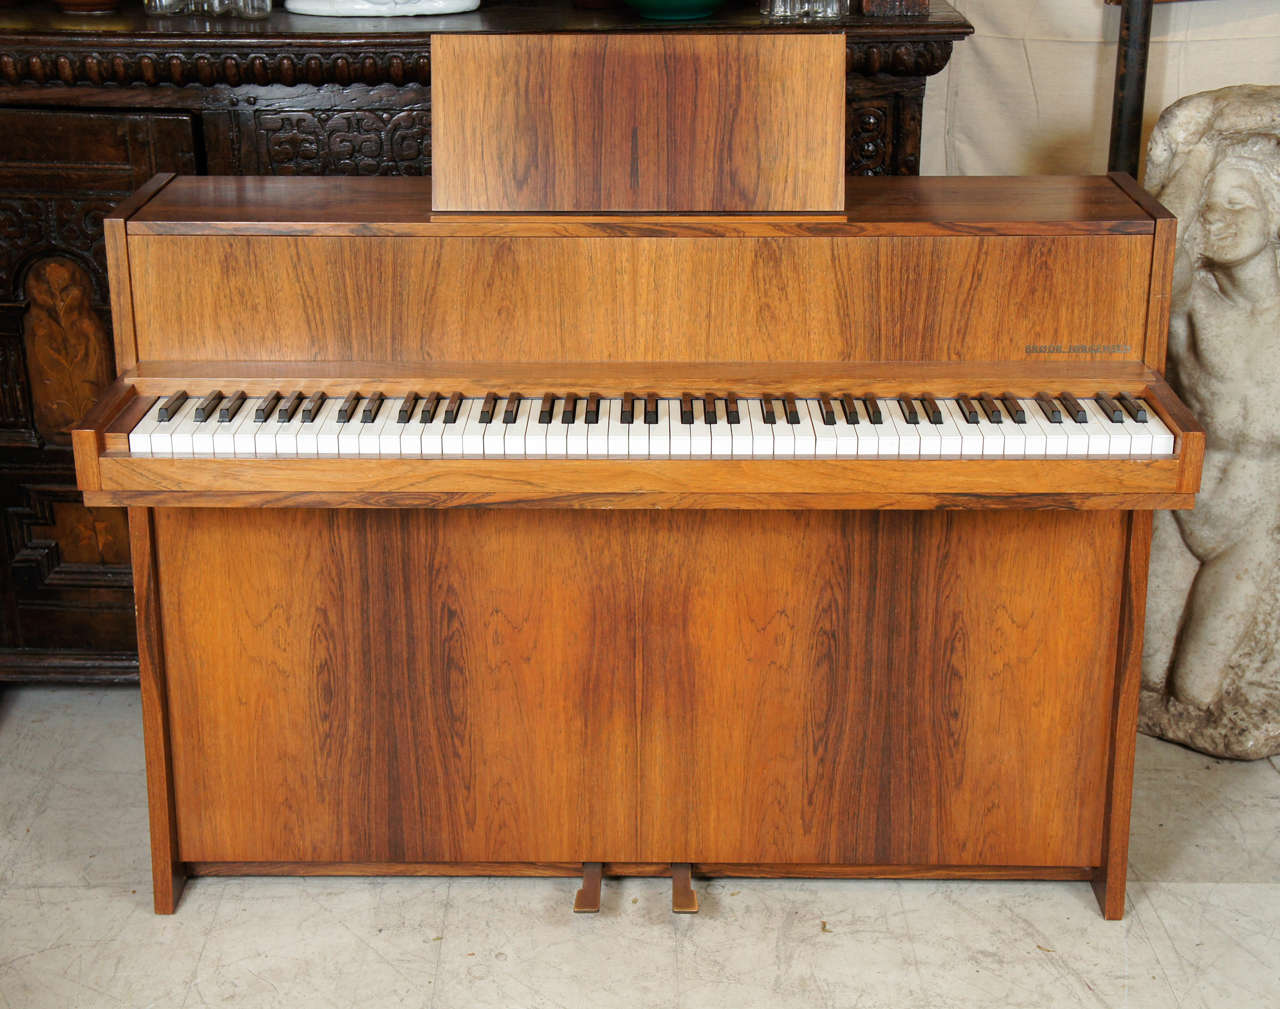 Danish modern Upright piano in rosewood by Brode Jorgensen, 
Copenhagen.  From all reports it has a wonderful sound.  